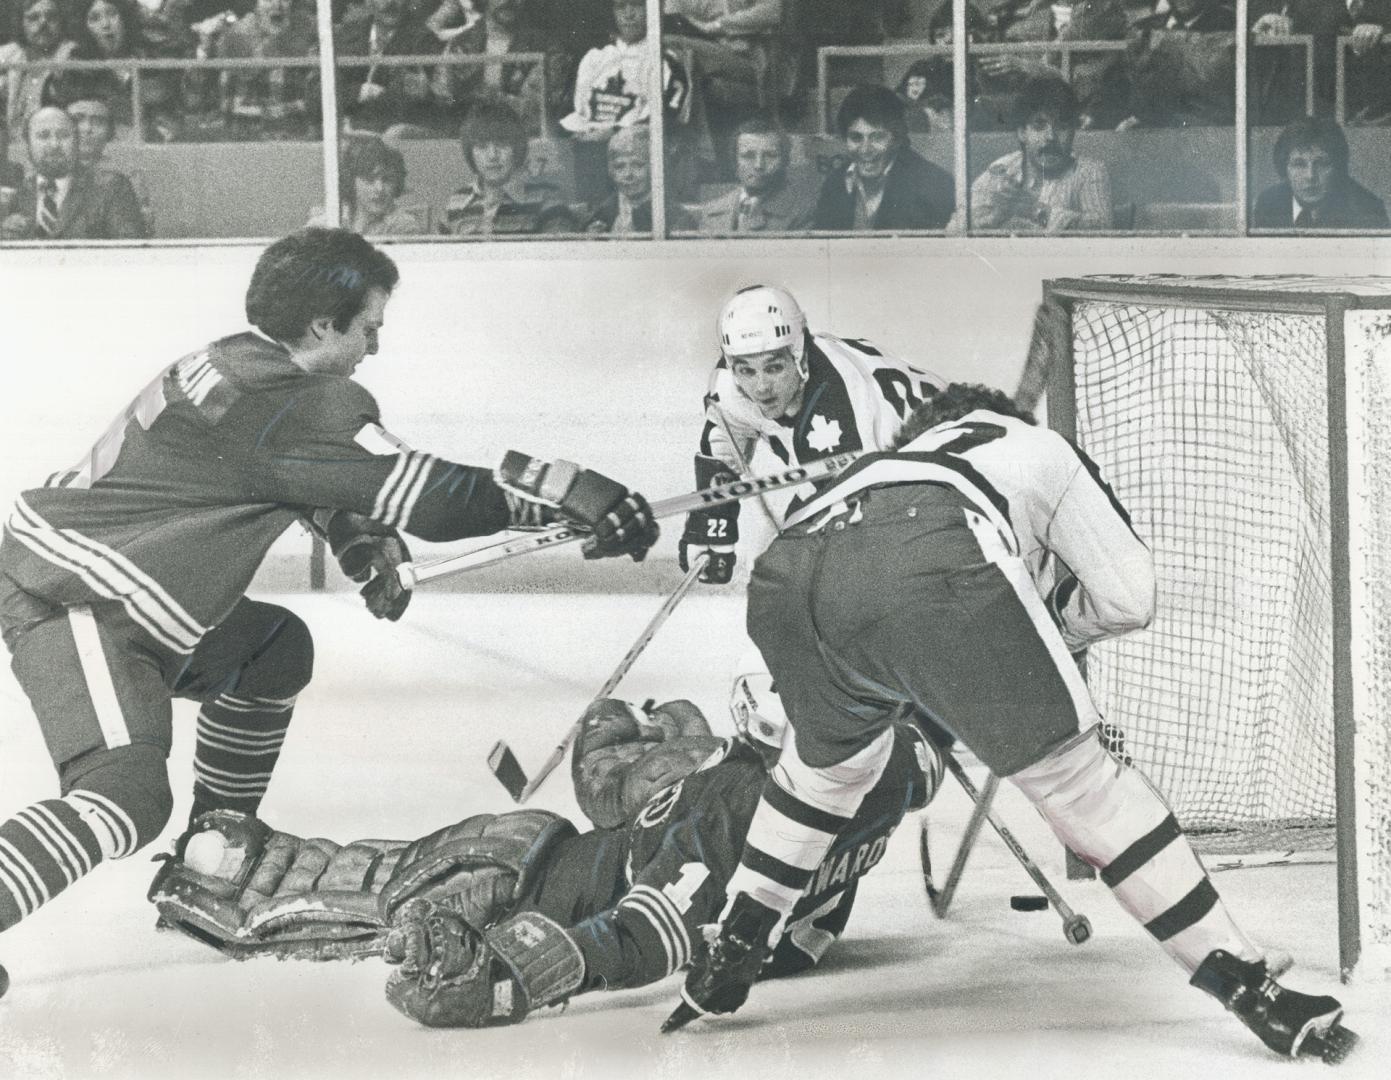 The Goal That Wasn't: Leafs' Darryl Sittler taps puck into net for what appeared to be a 3-1 Leaf lead in second period of last night's game with Buffalo Sabres at Gardens